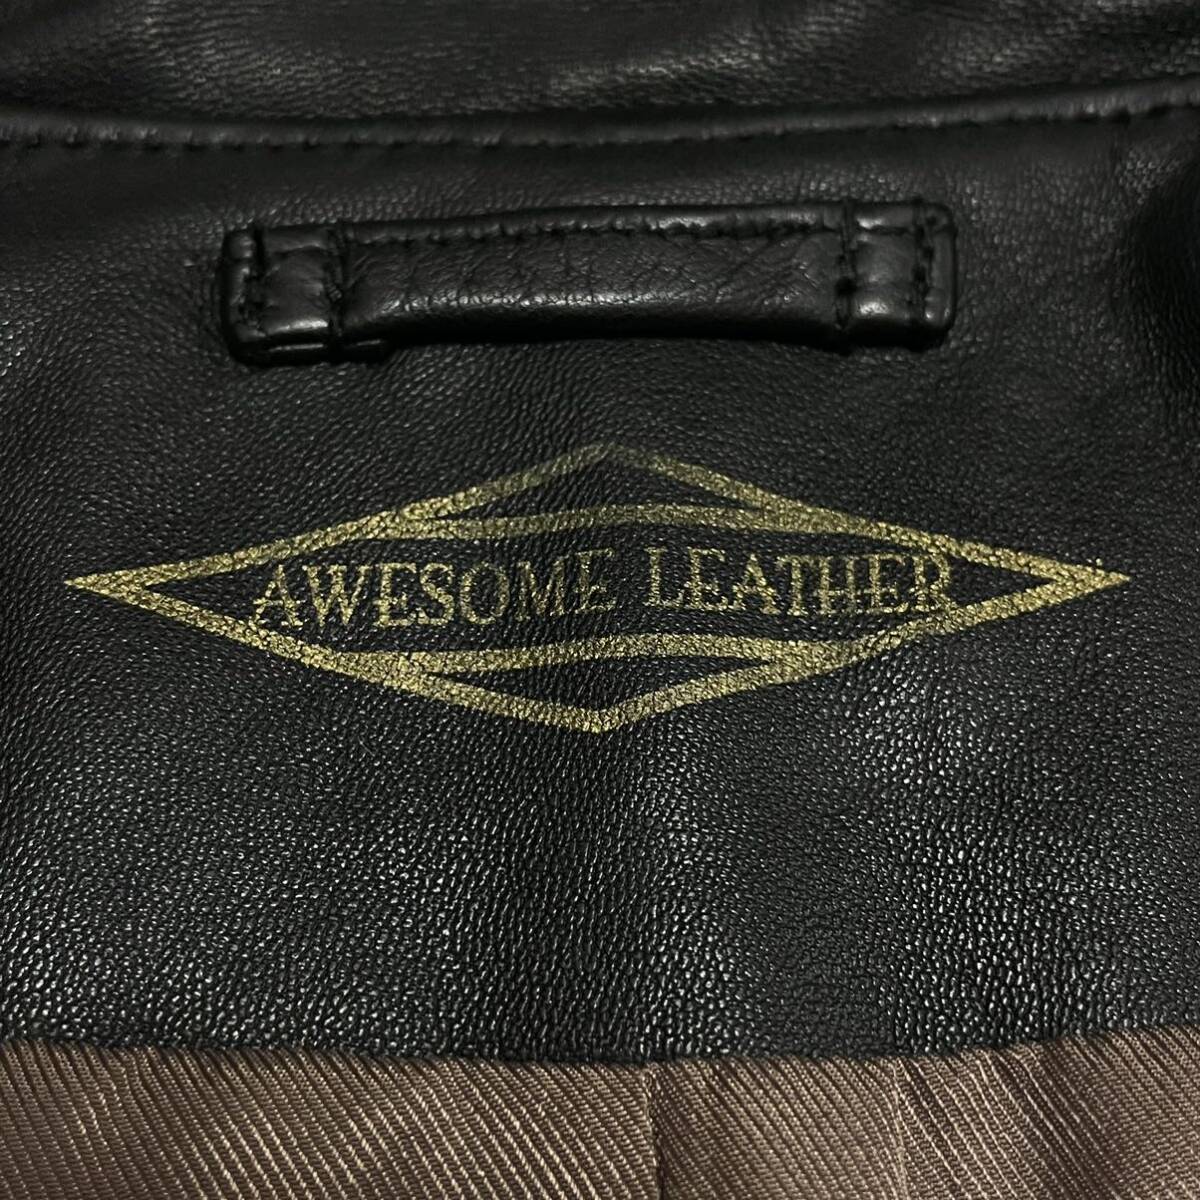  unused class /L size *o- Sam leather [ Toro Toro feeling of quality ]awesomeleather leather jacket Rider's go-to leather .. leather double Zip 3892